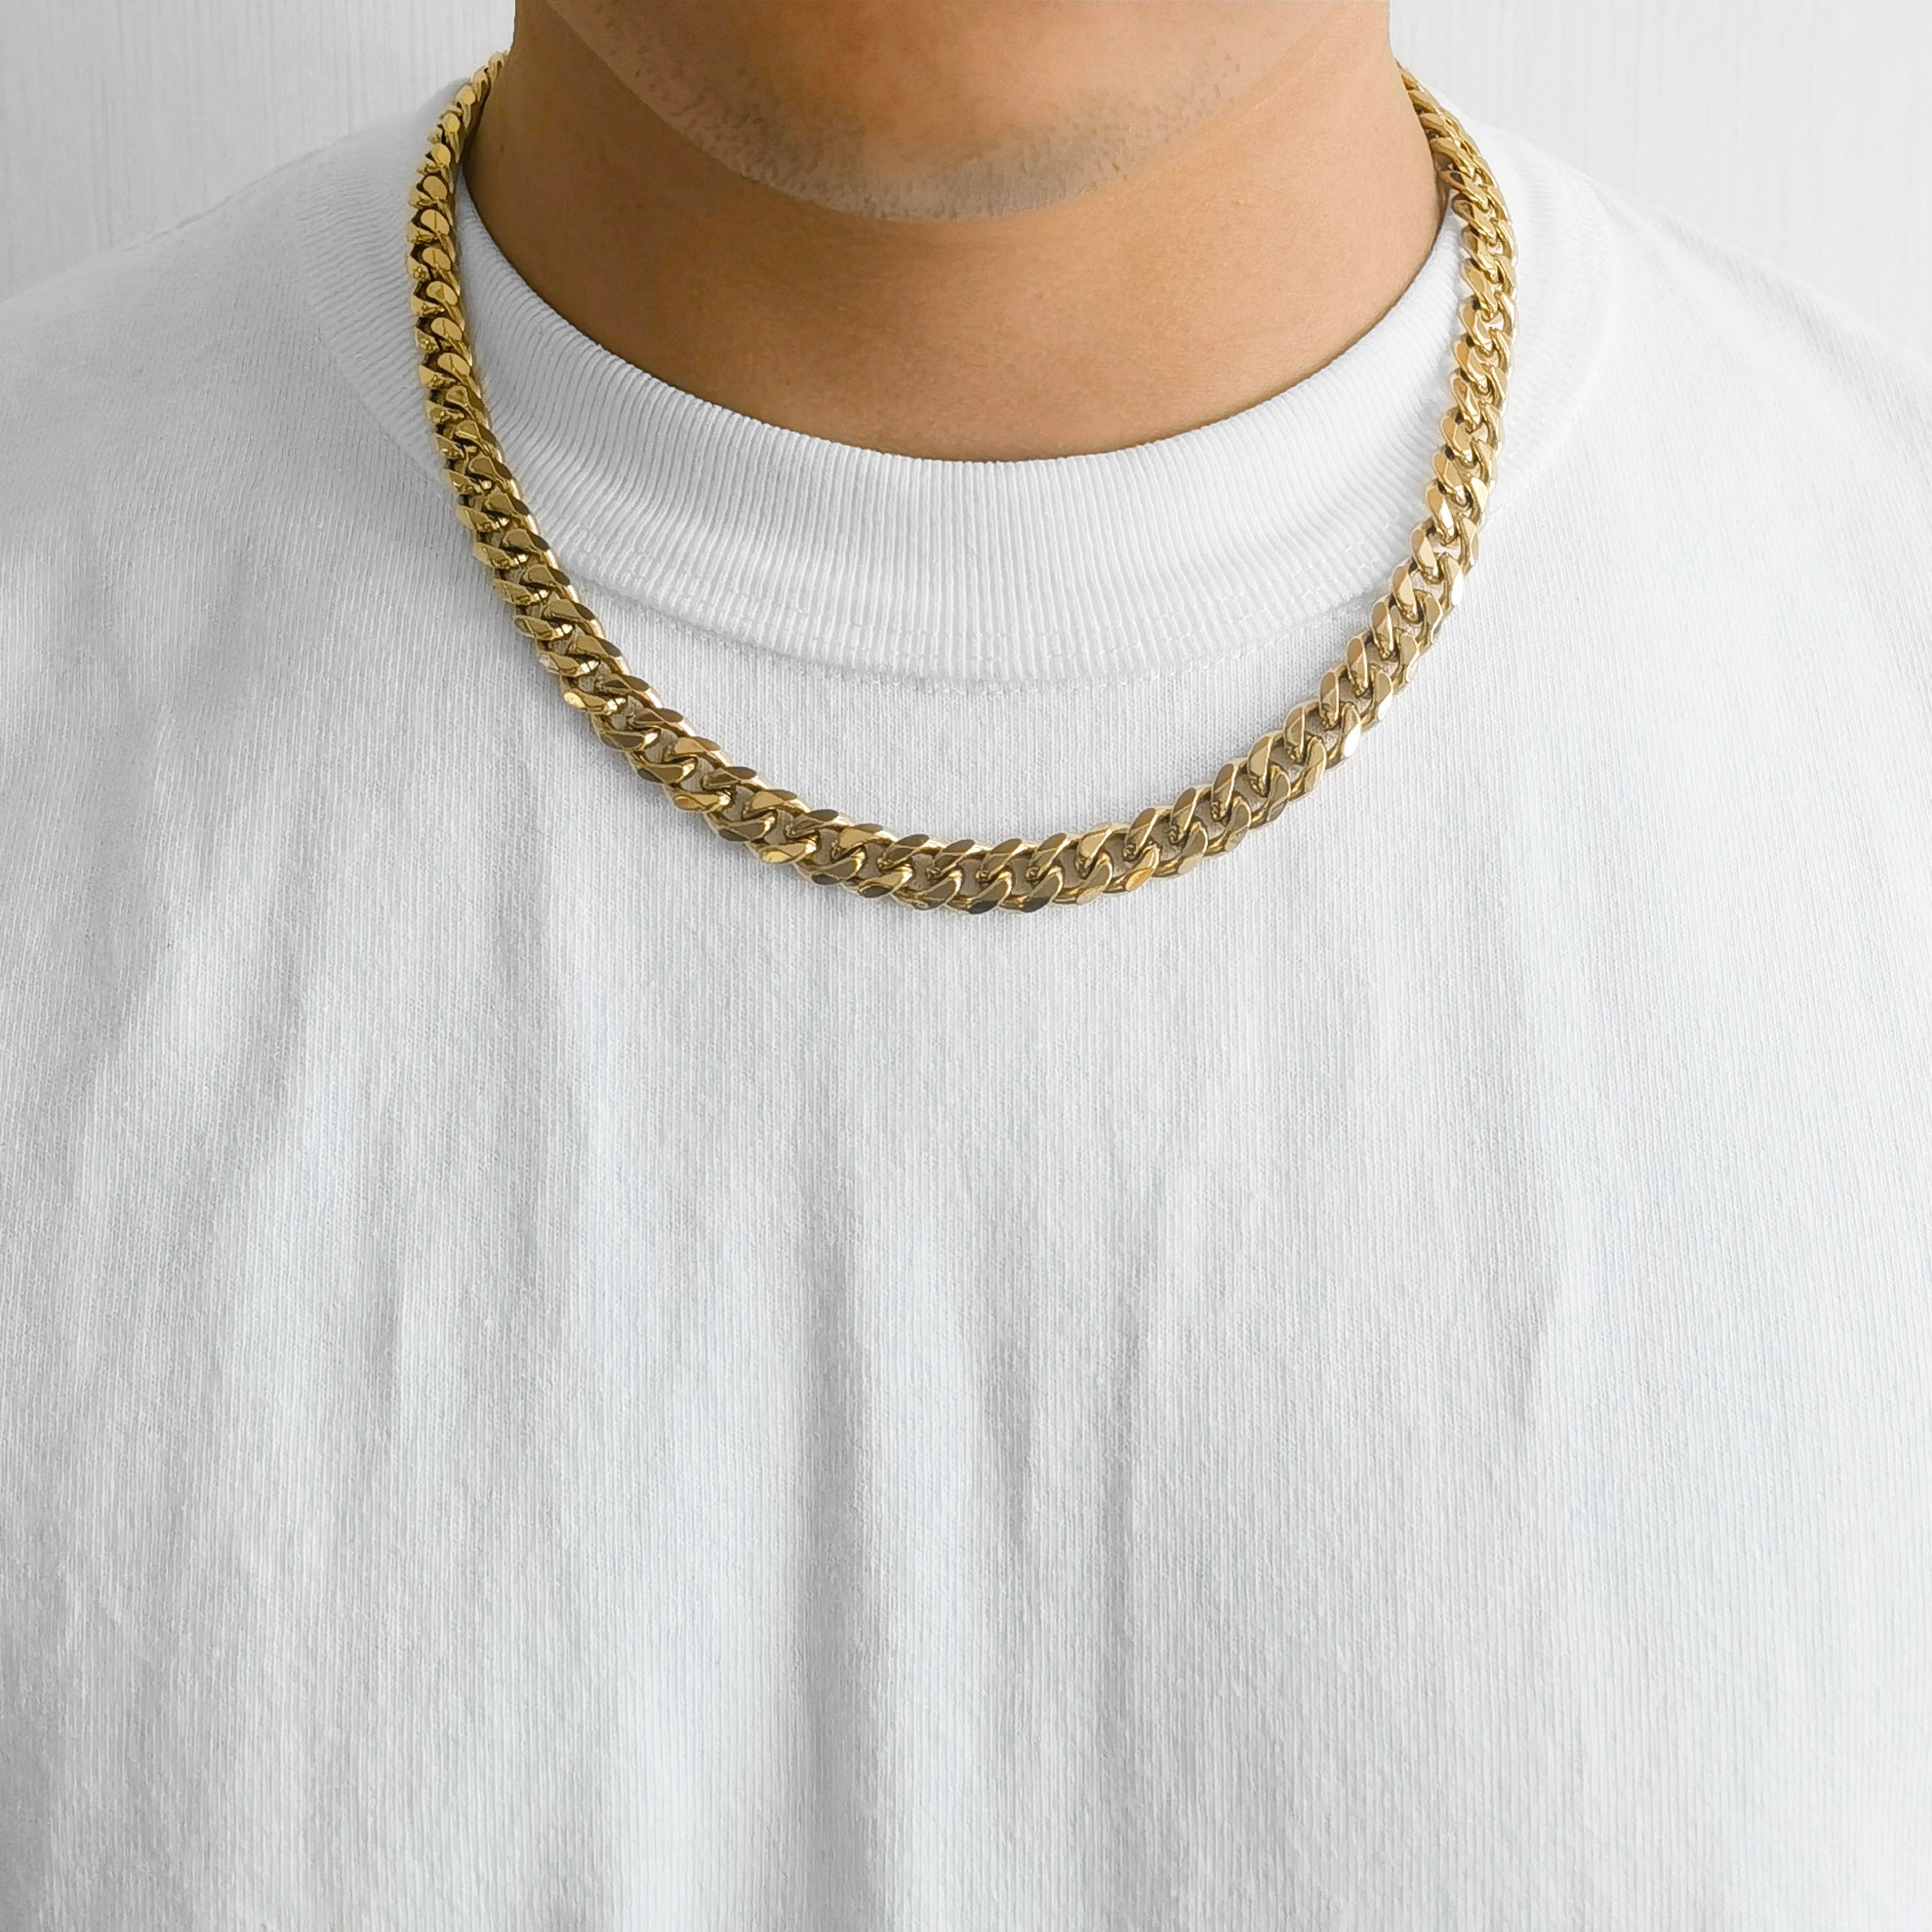 Men's 9mm Gold Plated Steel 18-24 Inch Curb Chain Necklace